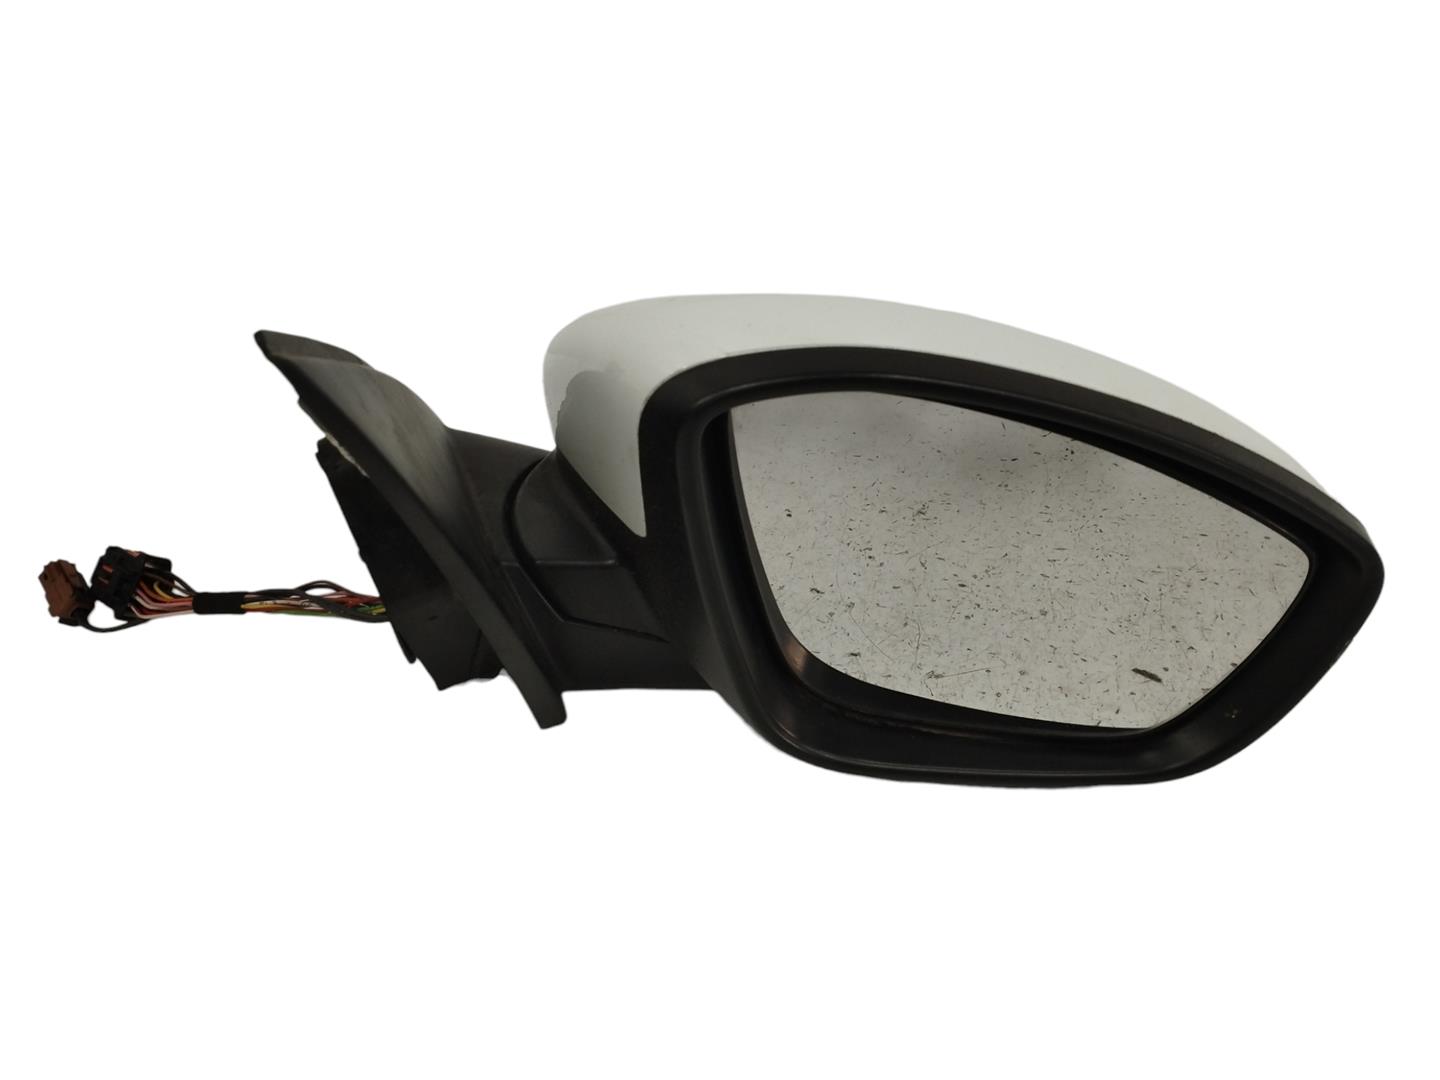 PEUGEOT 308 T9 (2013-2021) Right Side Wing Mirror 98088637XT, 2ENCHUFES211CABLES 22289289